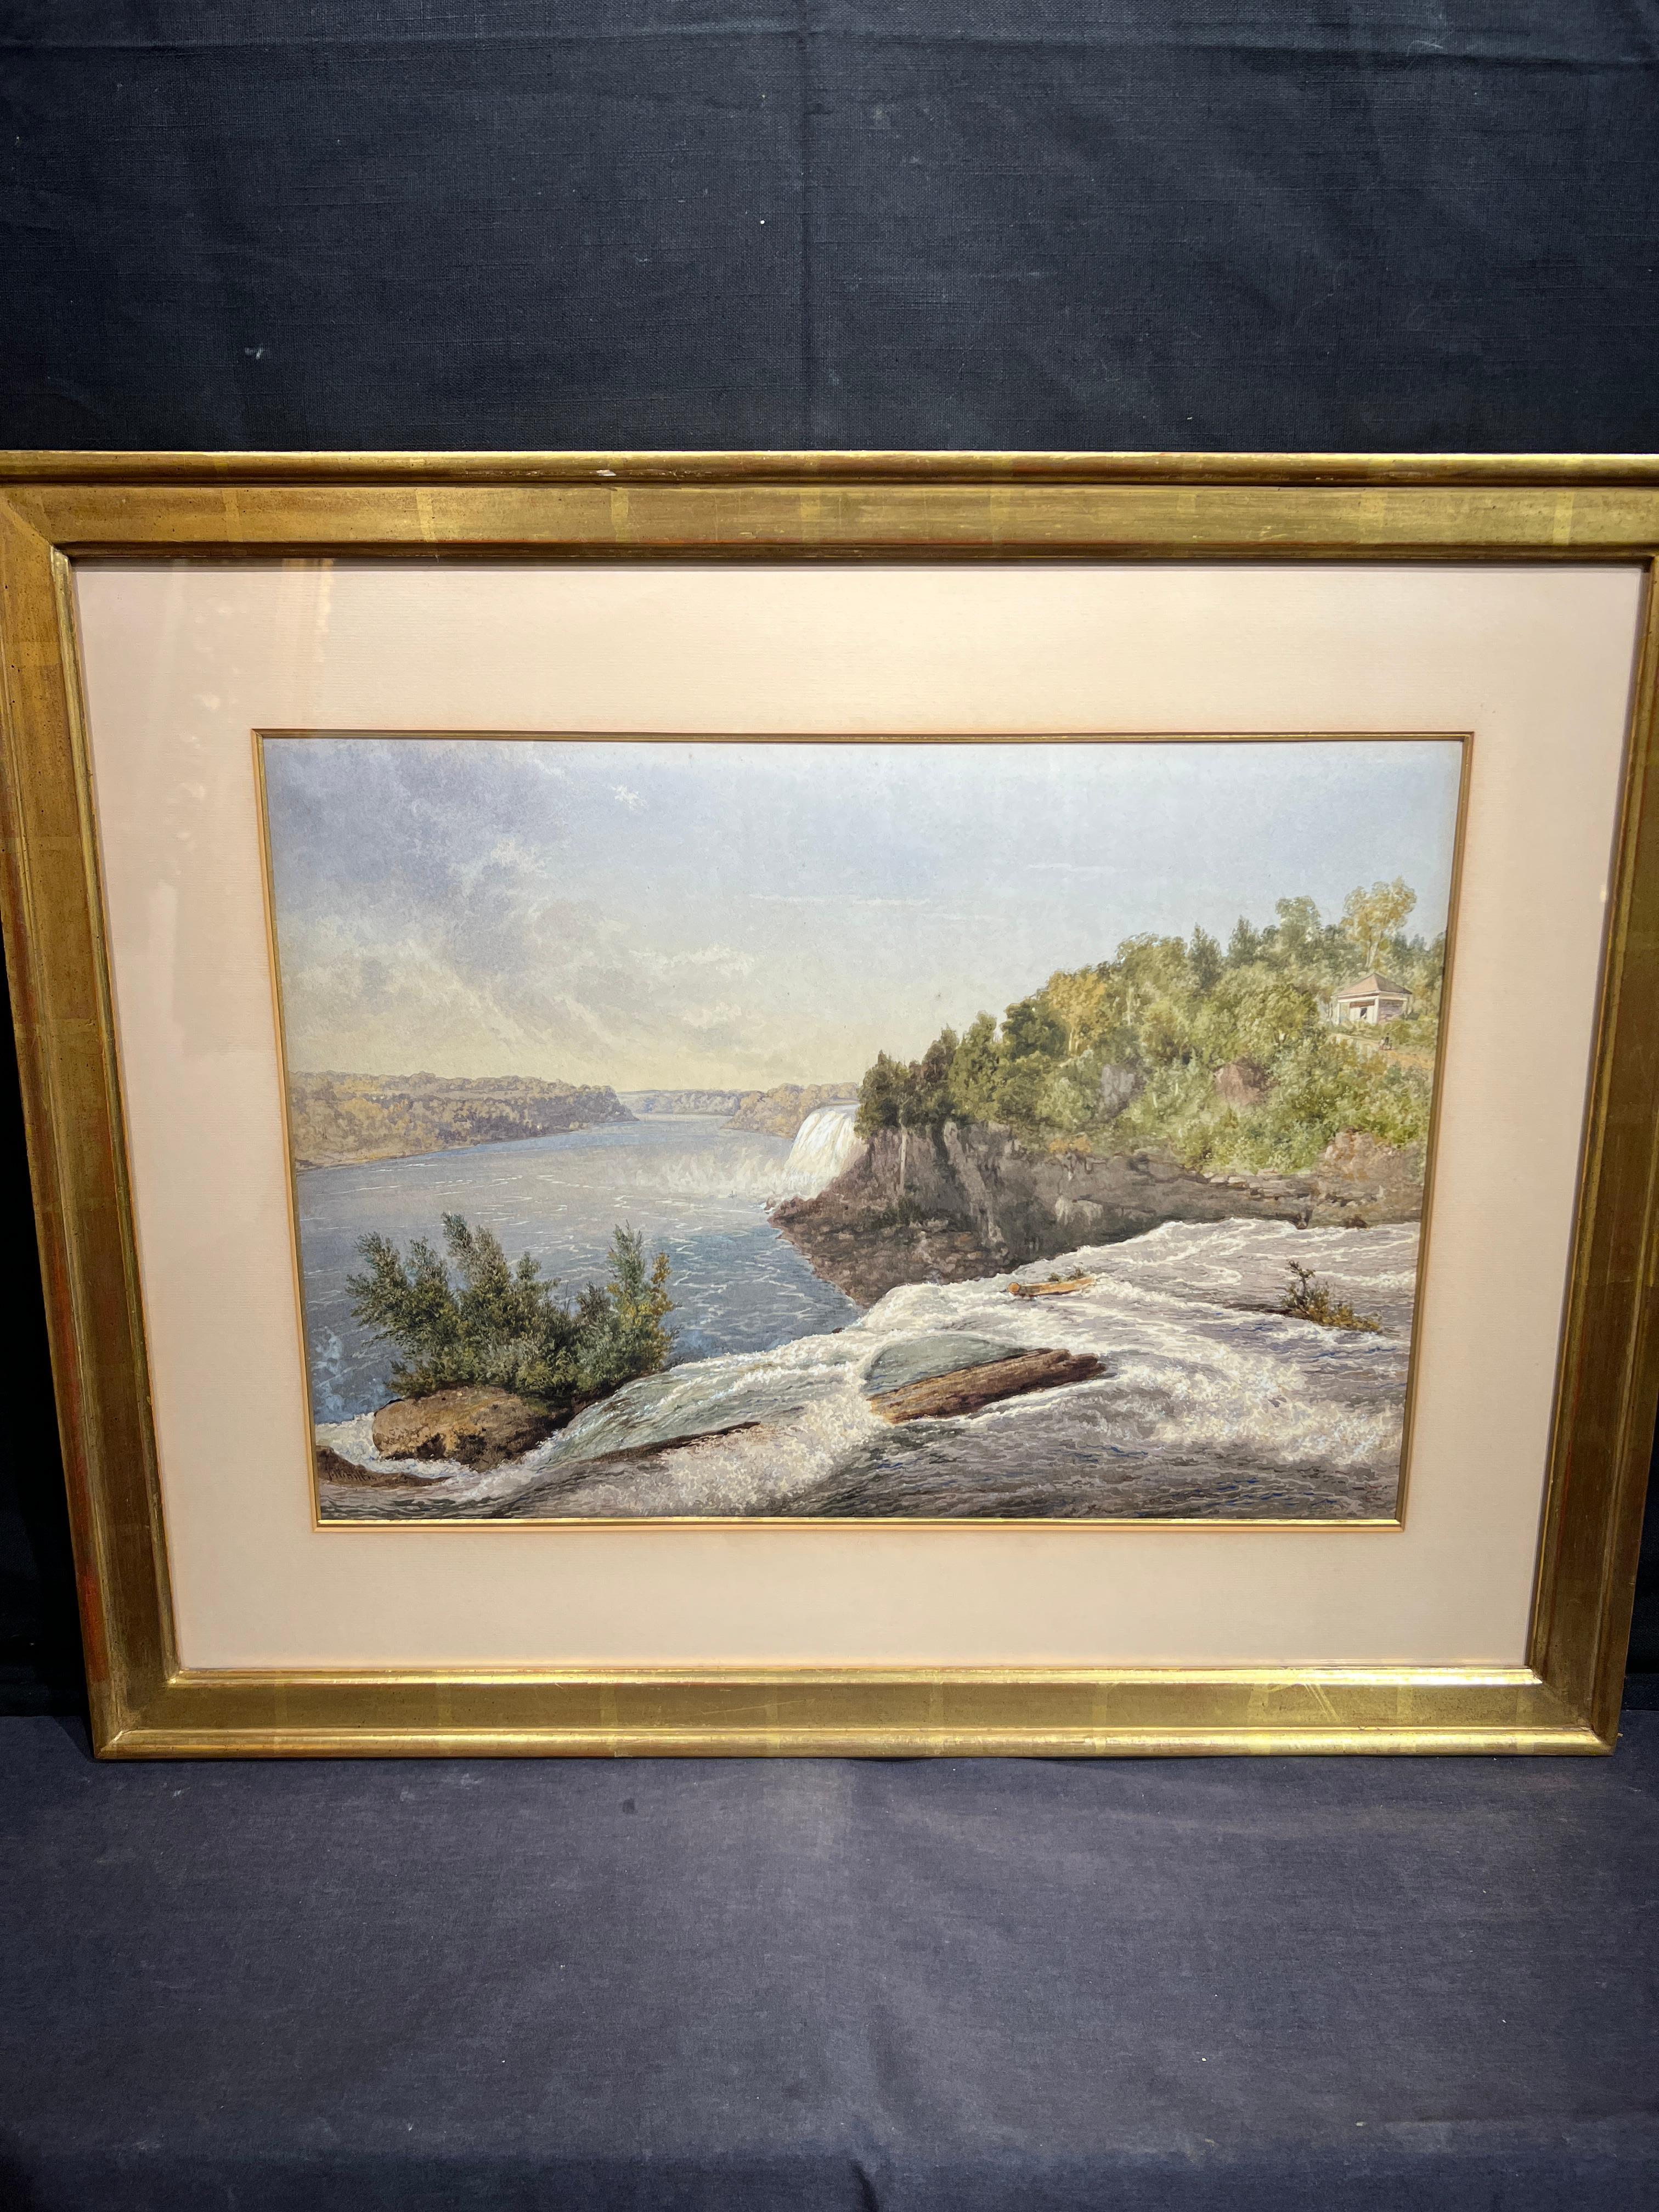 Hudson River Valley with Waterfall
By. John William Hill (English, American, 1812-1879)
Signed Lower Left
Unframed: 14